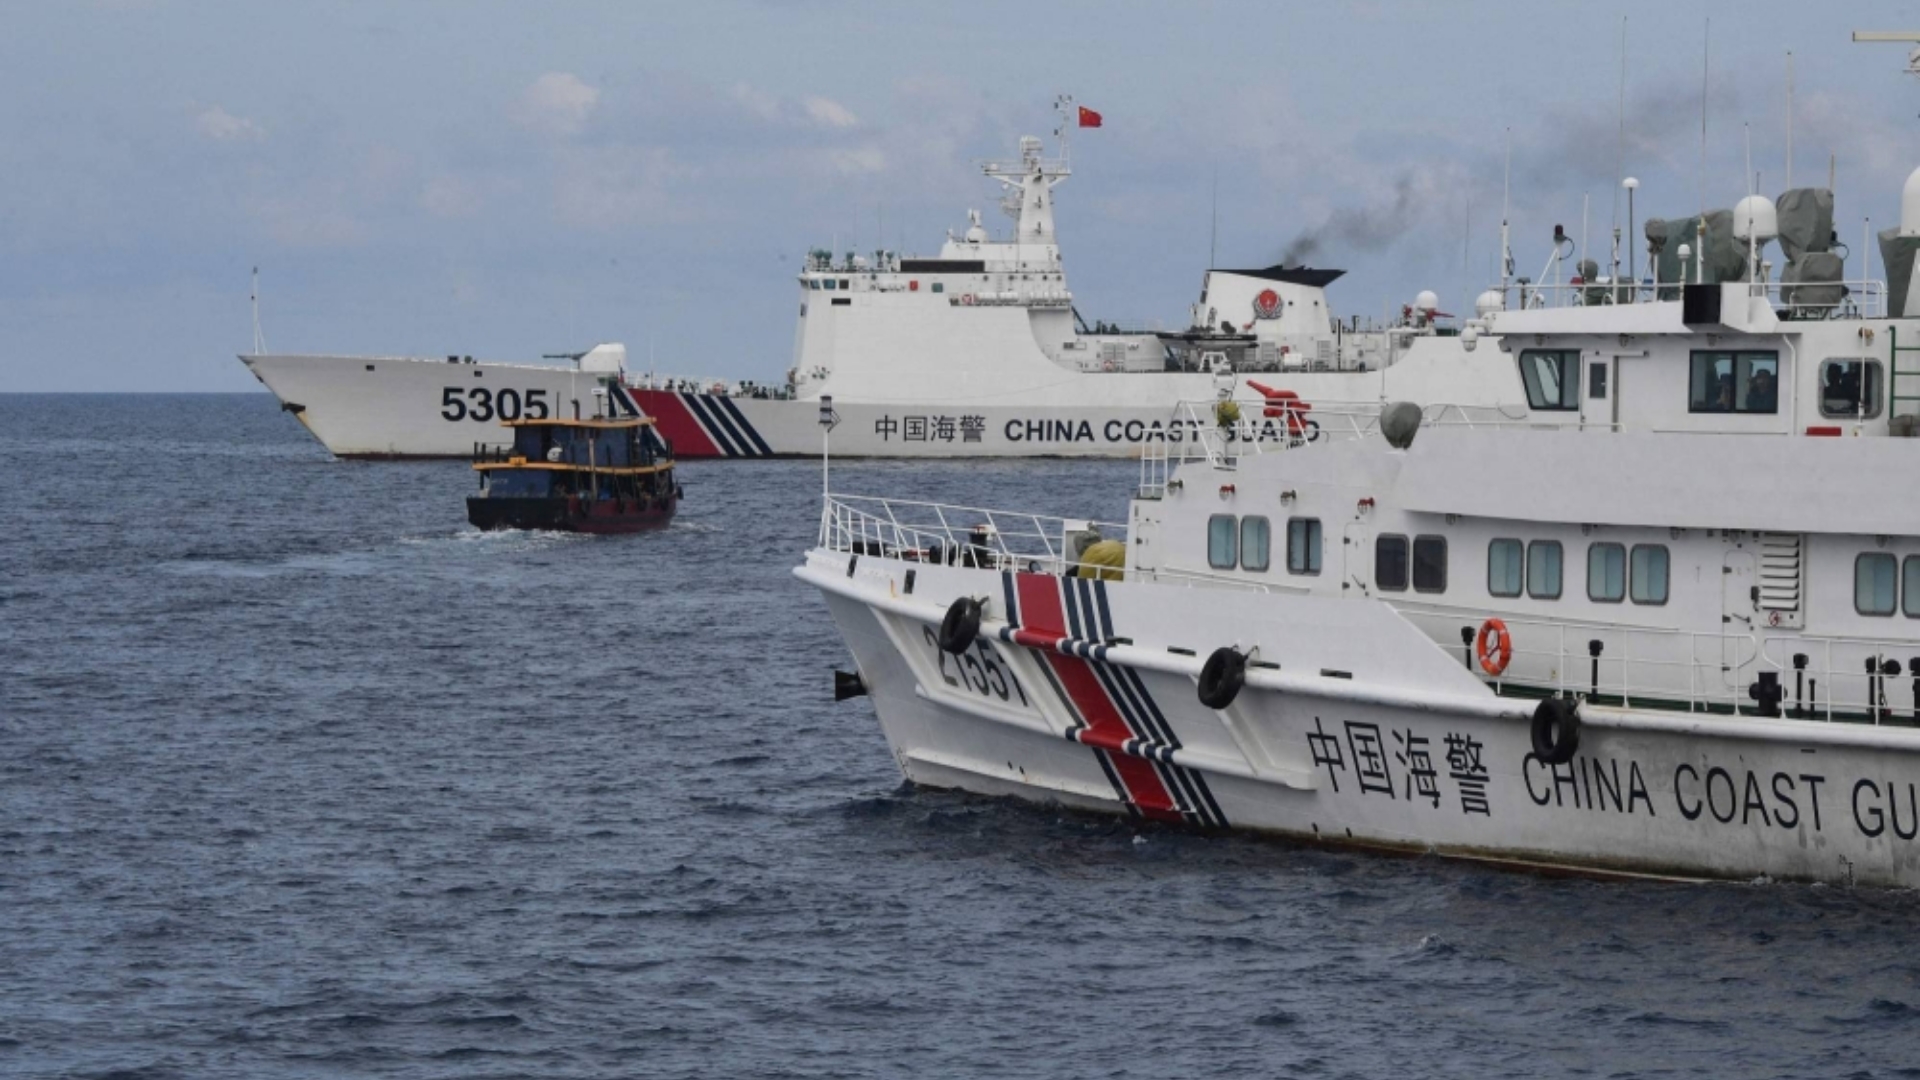 After China launched a new water cannon attack, the Philippines received support from its allies.